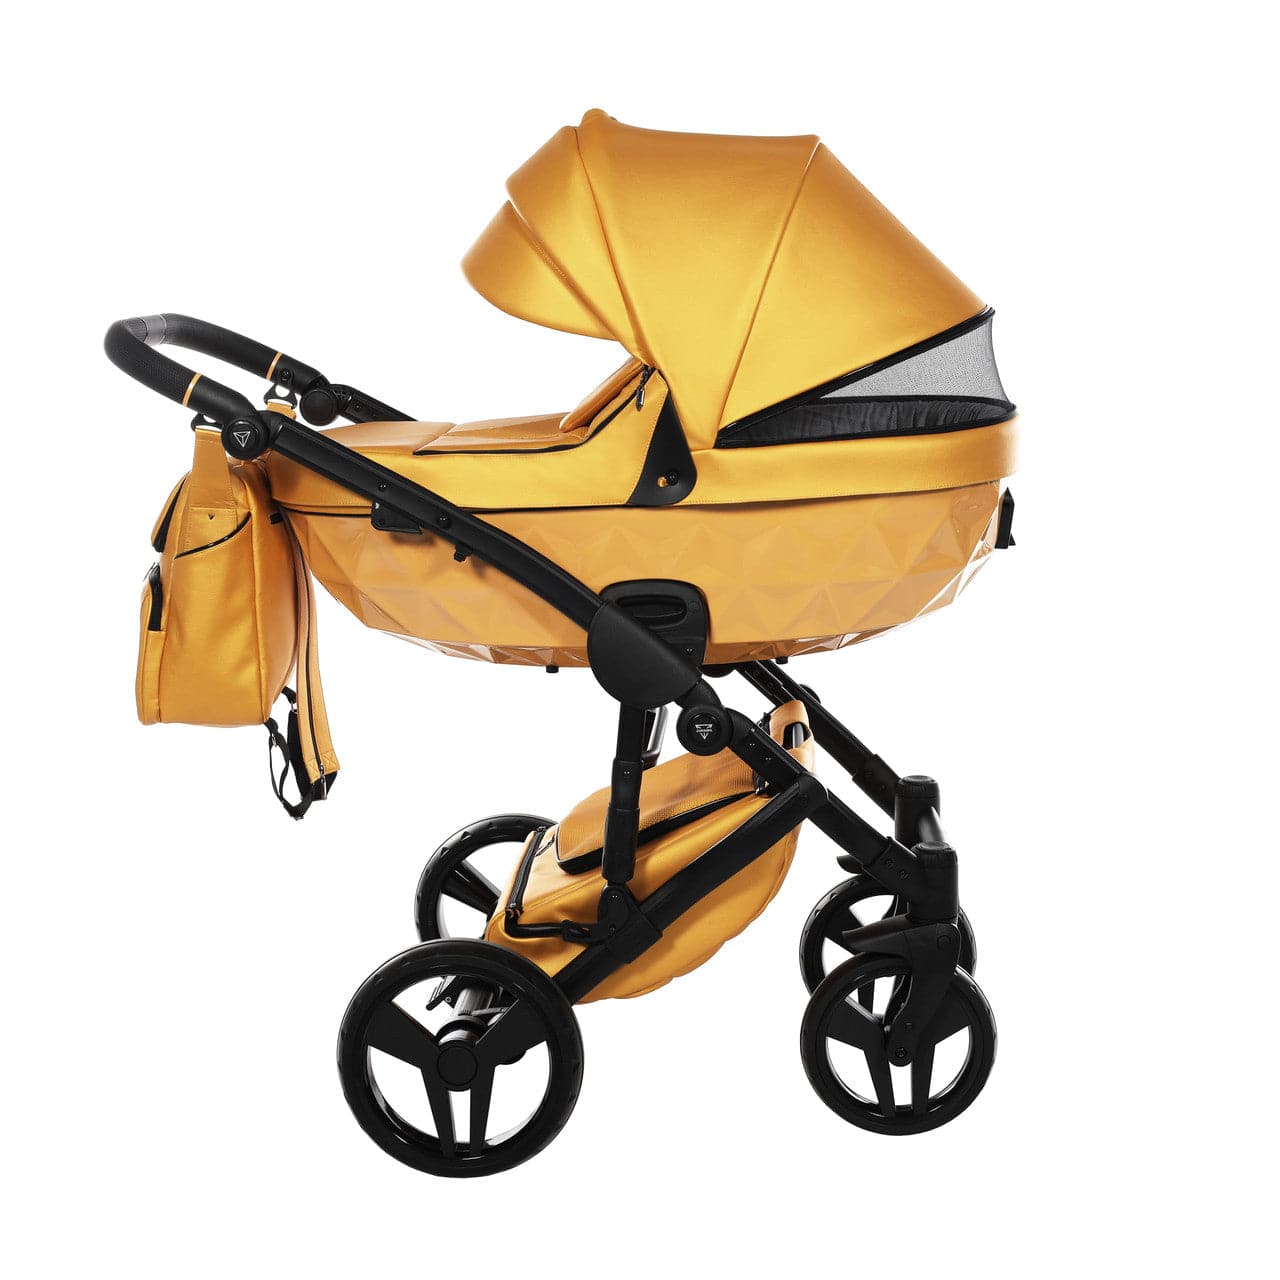 Junama S-Class 2 In 1 Pram - Yellow - For Your Little One